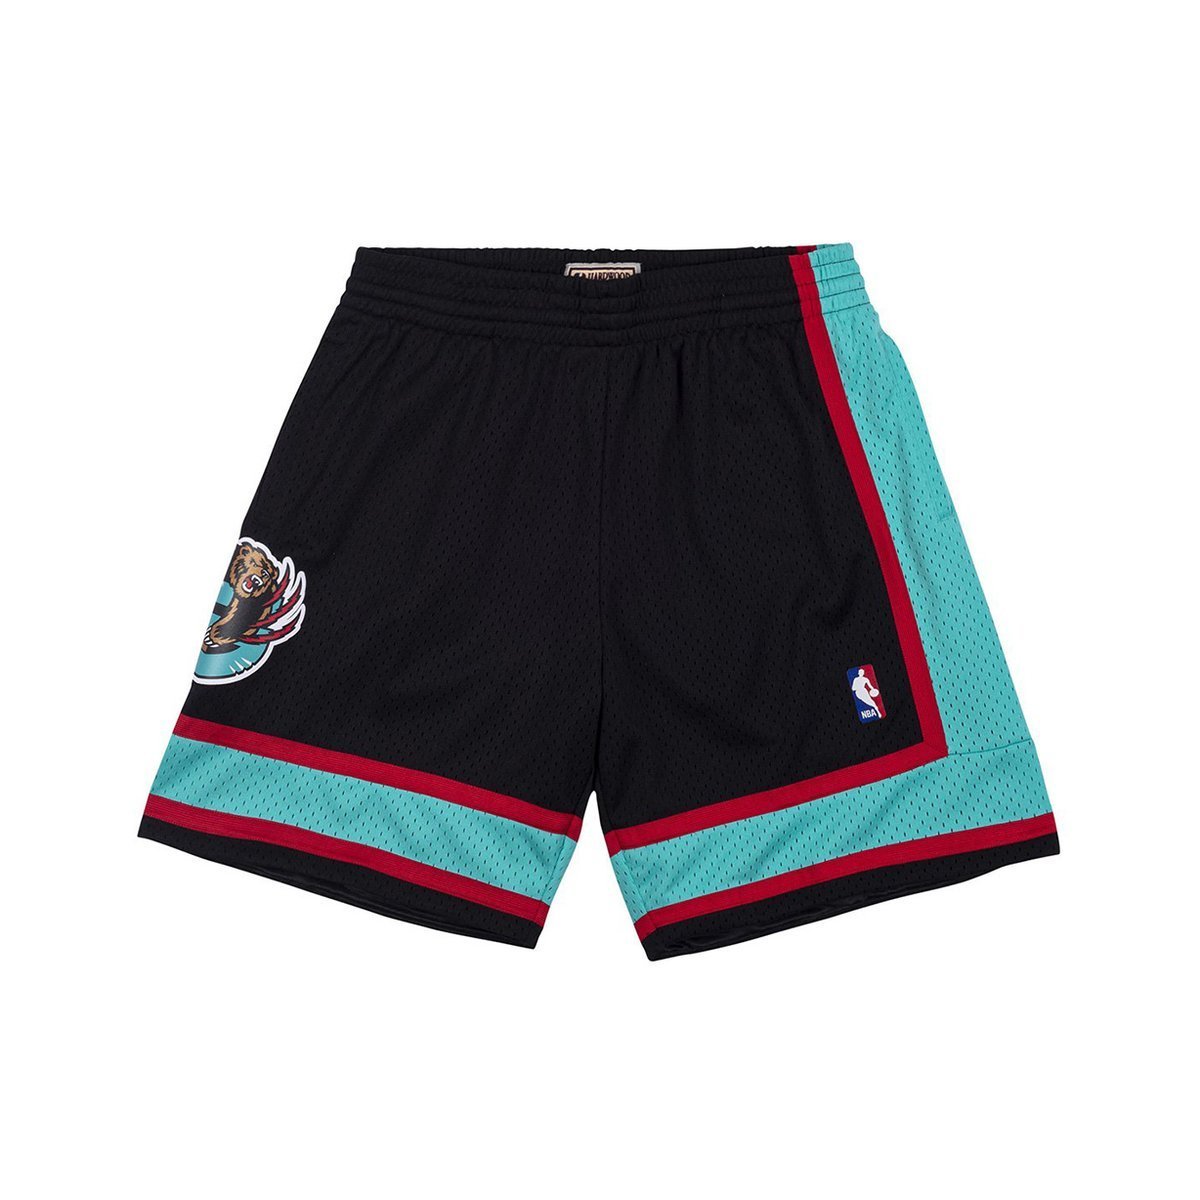 Mitchell & Ness shorts Vancouver Grizzlies black/teal Swingman Shorts ...